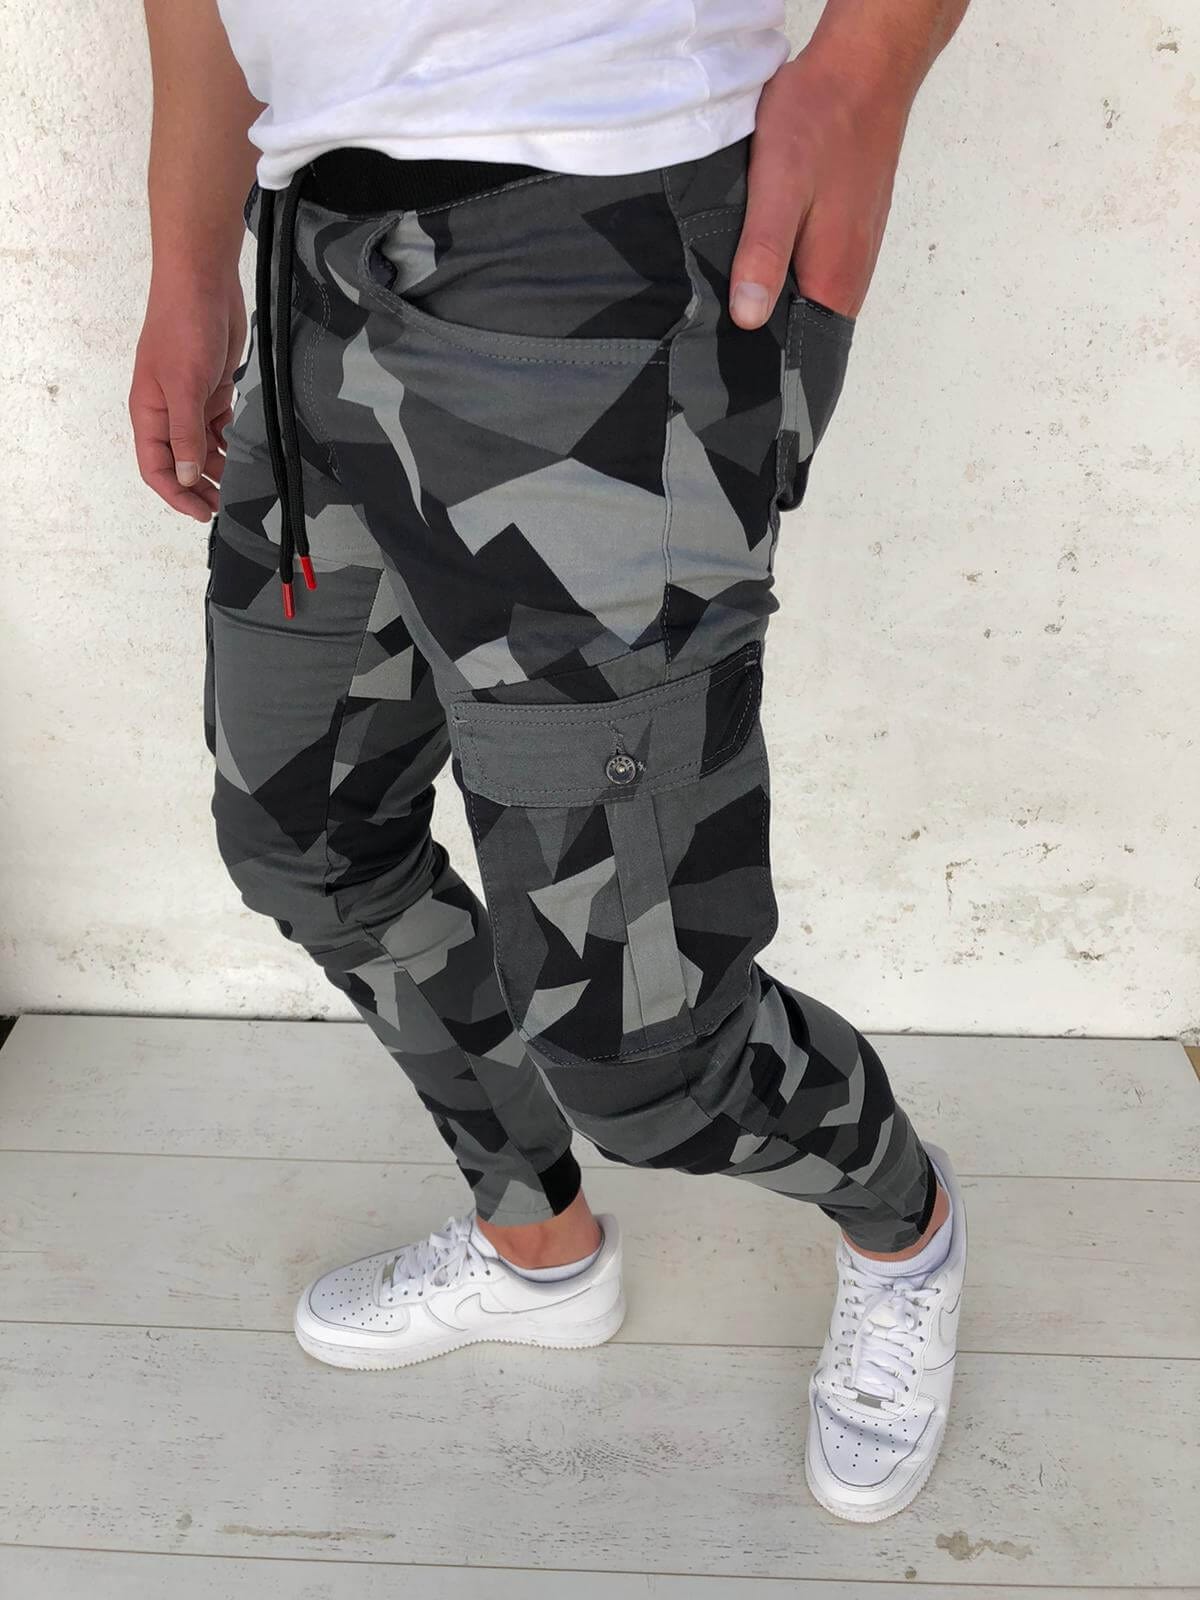 ALLRJ Black / 2XL Check Camouflage Sweatpants Men'S Slim Trend Fashion Casual Pants With Feet